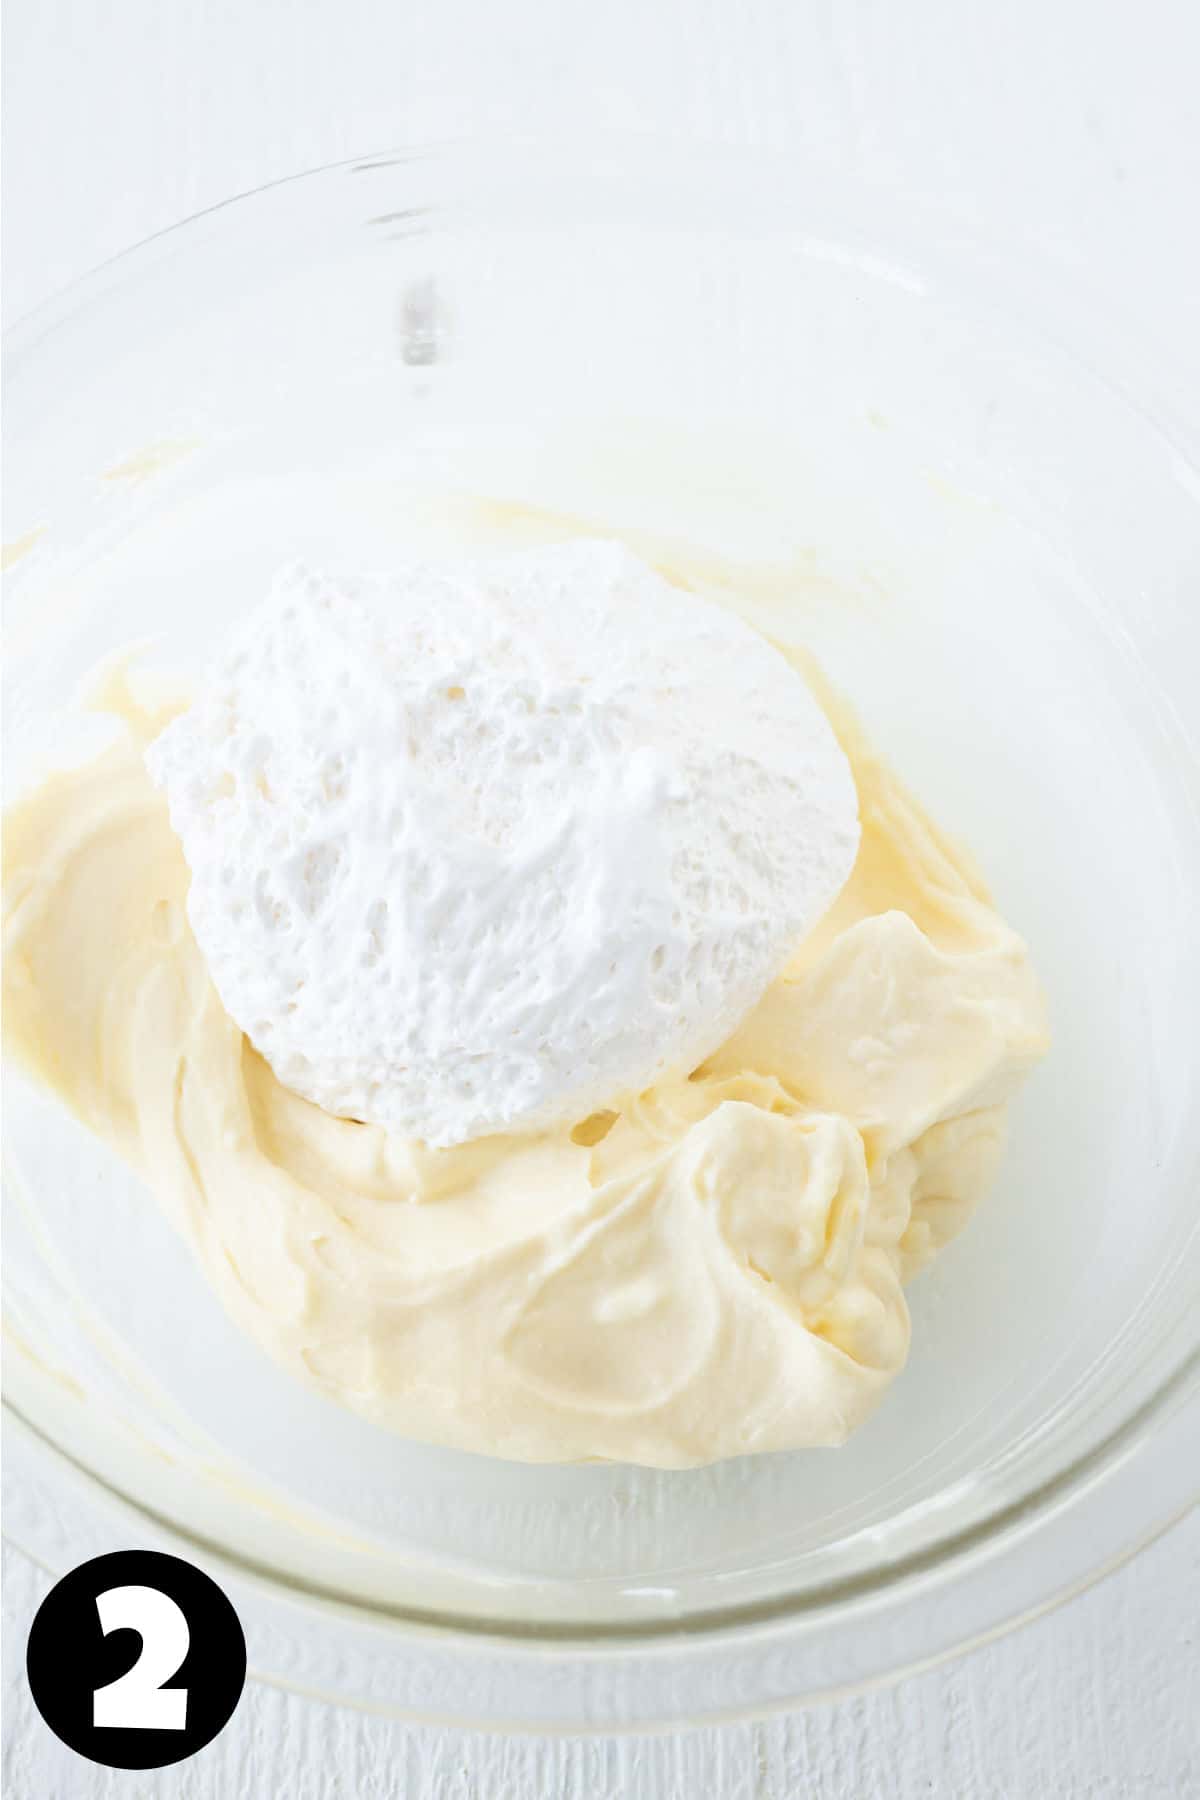 Marshmallow fluff on top of whipped cream cheese in a mixing bowl.